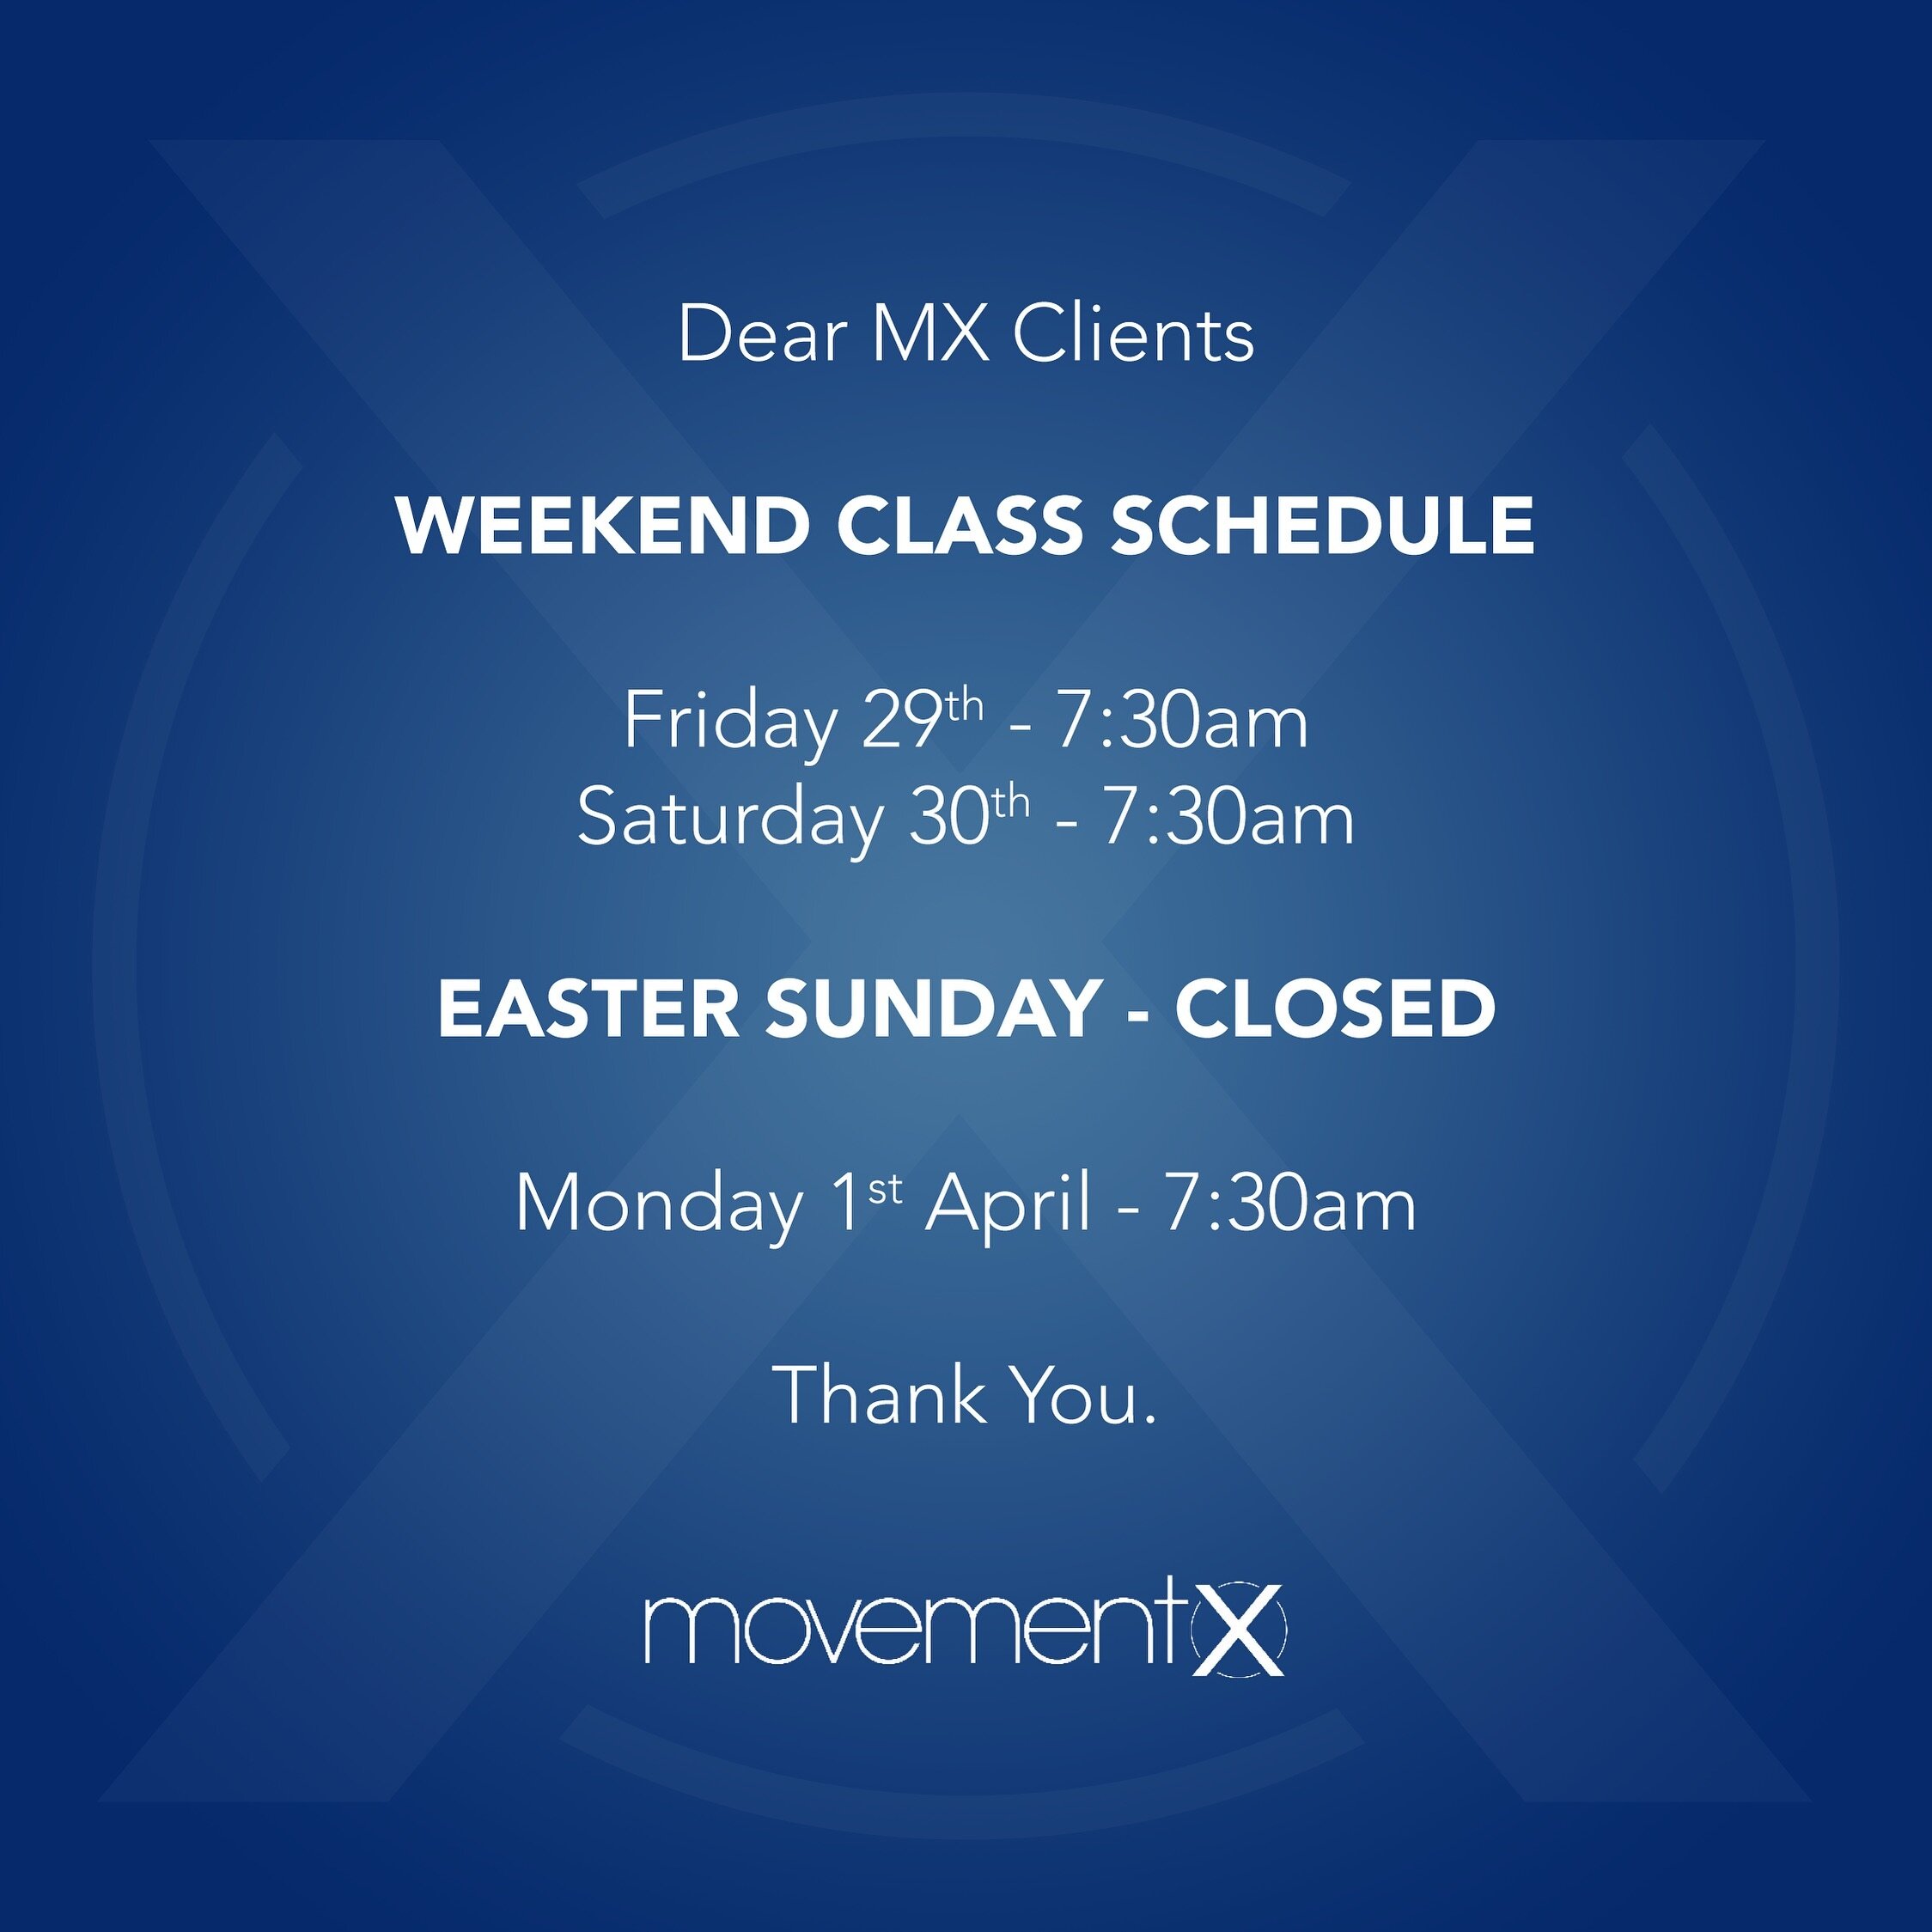 UPDATE: MX Clients, please take note of our class schedule for this weekend.

We hope you all have a wonderful Easter break! 🐰

#movementxbedfordview #classschedule #easterweekend